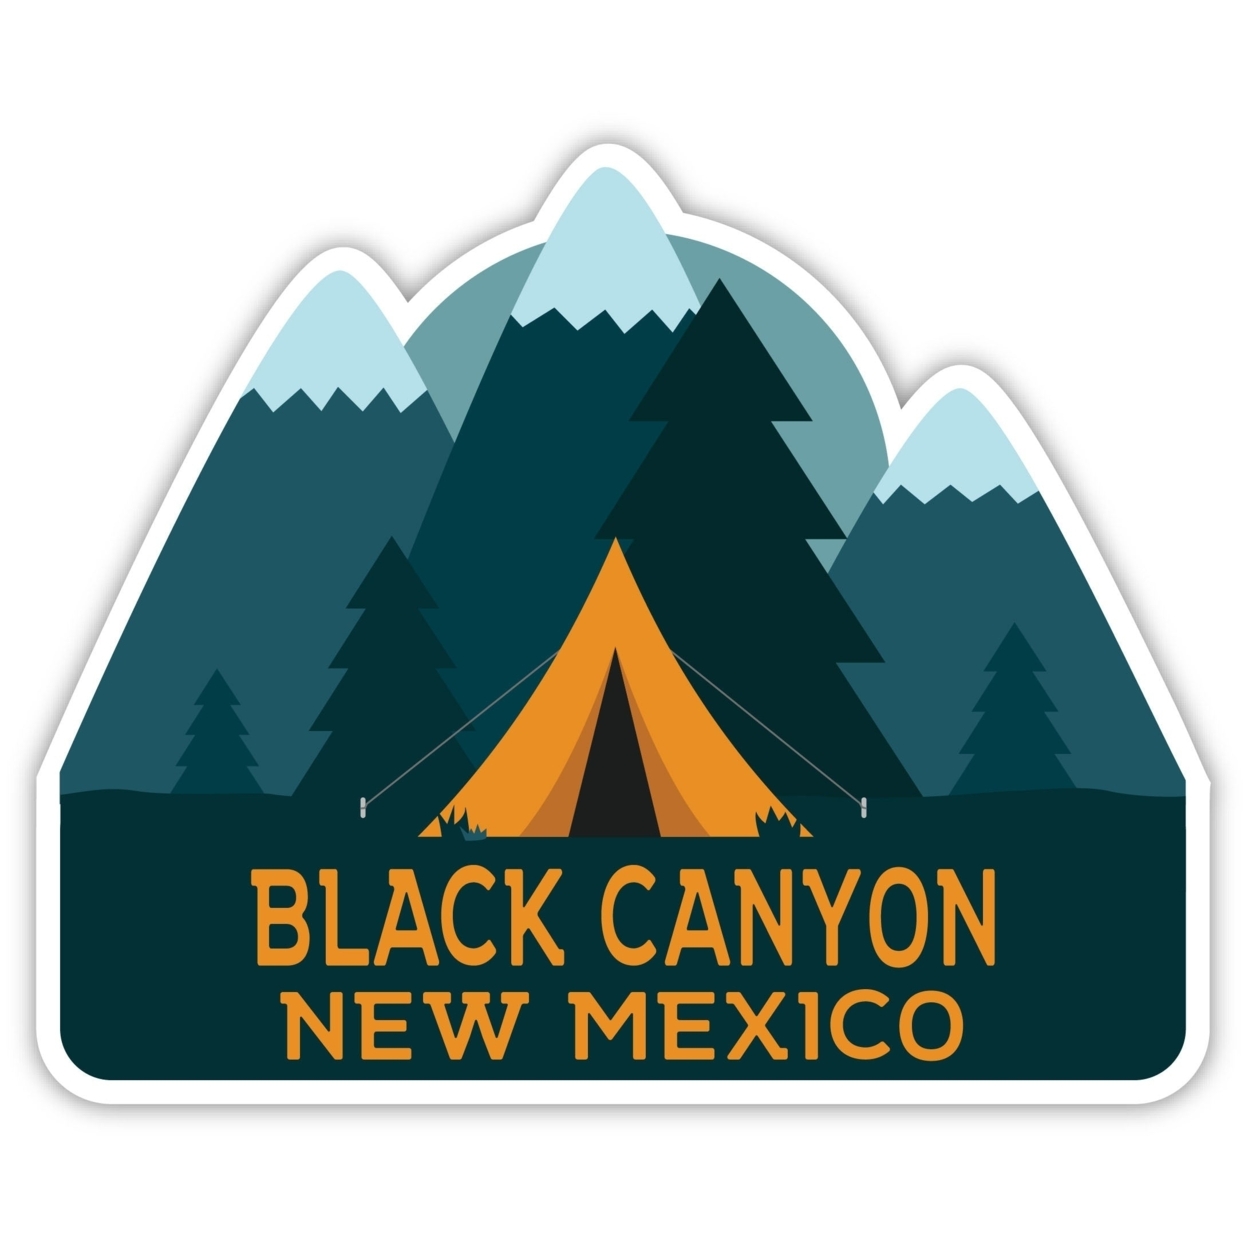 Black Canyon New Mexico Souvenir Decorative Stickers (Choose Theme And Size) - 4-Pack, 6-Inch, Tent